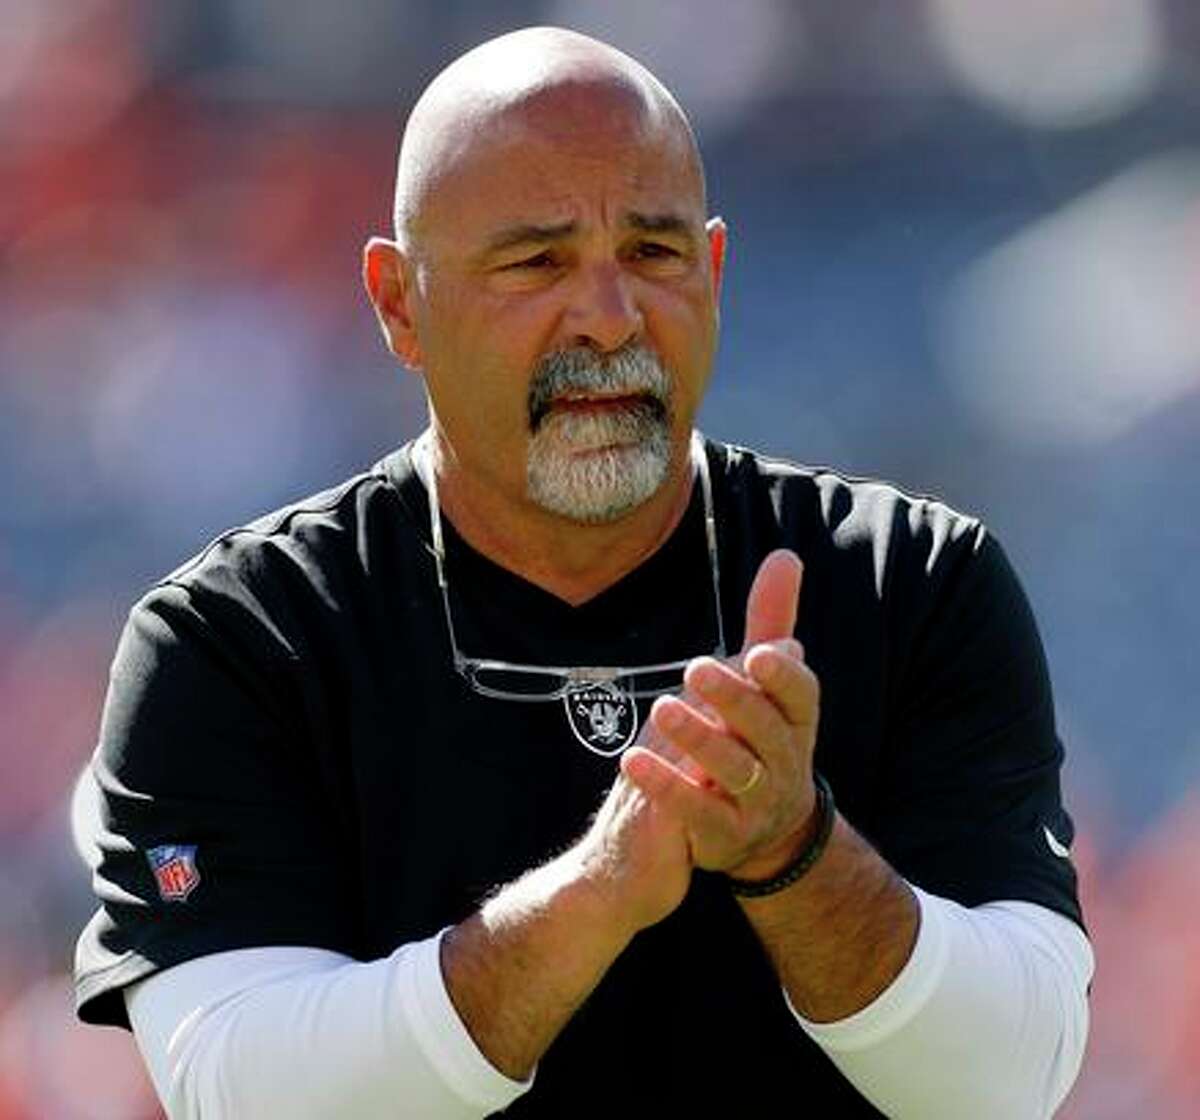 DENVER, COLORADO - OCTOBER 17: Interim Coach Rich Bisaccia of the Las Vegas Raiders reacts before the game against the Denver Broncos at Empower Field At Mile High on October 17, 2021 in Denver, Colorado. (Photo by Justin Edmonds/Getty Images)